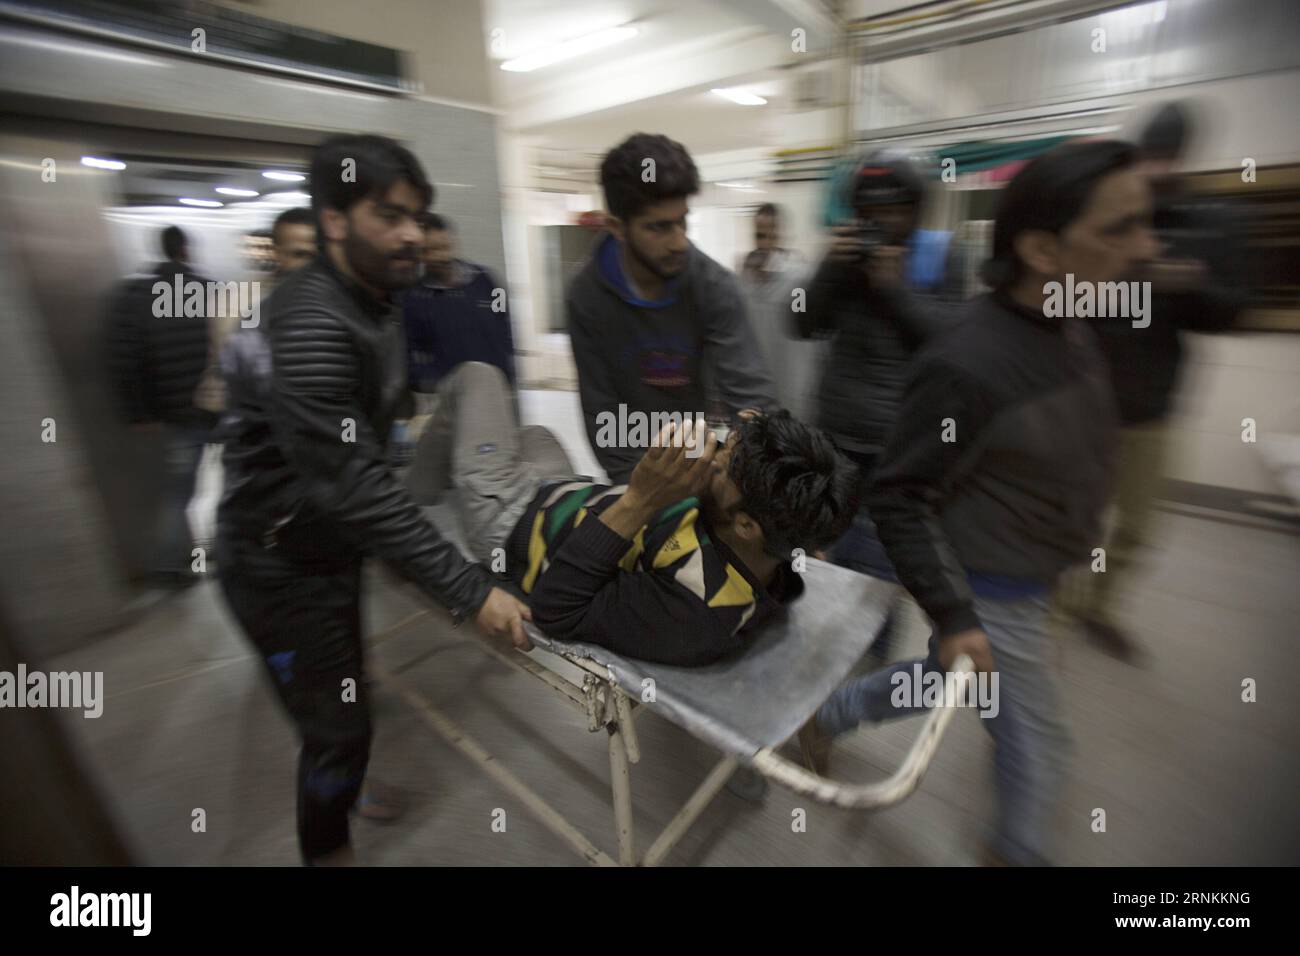 (170409) -- SRINAGAR, April 9, 2017 -- People transfer a wounded person inside a hospital in Srinagar, summer capital of Indian-controlled Kashmir, April 9, 2017. At least three persons were killed and several others injured on Sunday when Indian security forces opened fire on a stone-pelting mob that stormed a polling station in Indian-controlled Kashmir s parliamentary constituency of Srinagar. )(rh) KASHMIR-SRINAGAR-POLITICS JavedxDar PUBLICATIONxNOTxINxCHN   Srinagar April 9 2017 Celebrities Transfer a Wounded Person Inside a Hospital in Srinagar Summer Capital of Indian Controlled Kashmir Stock Photo